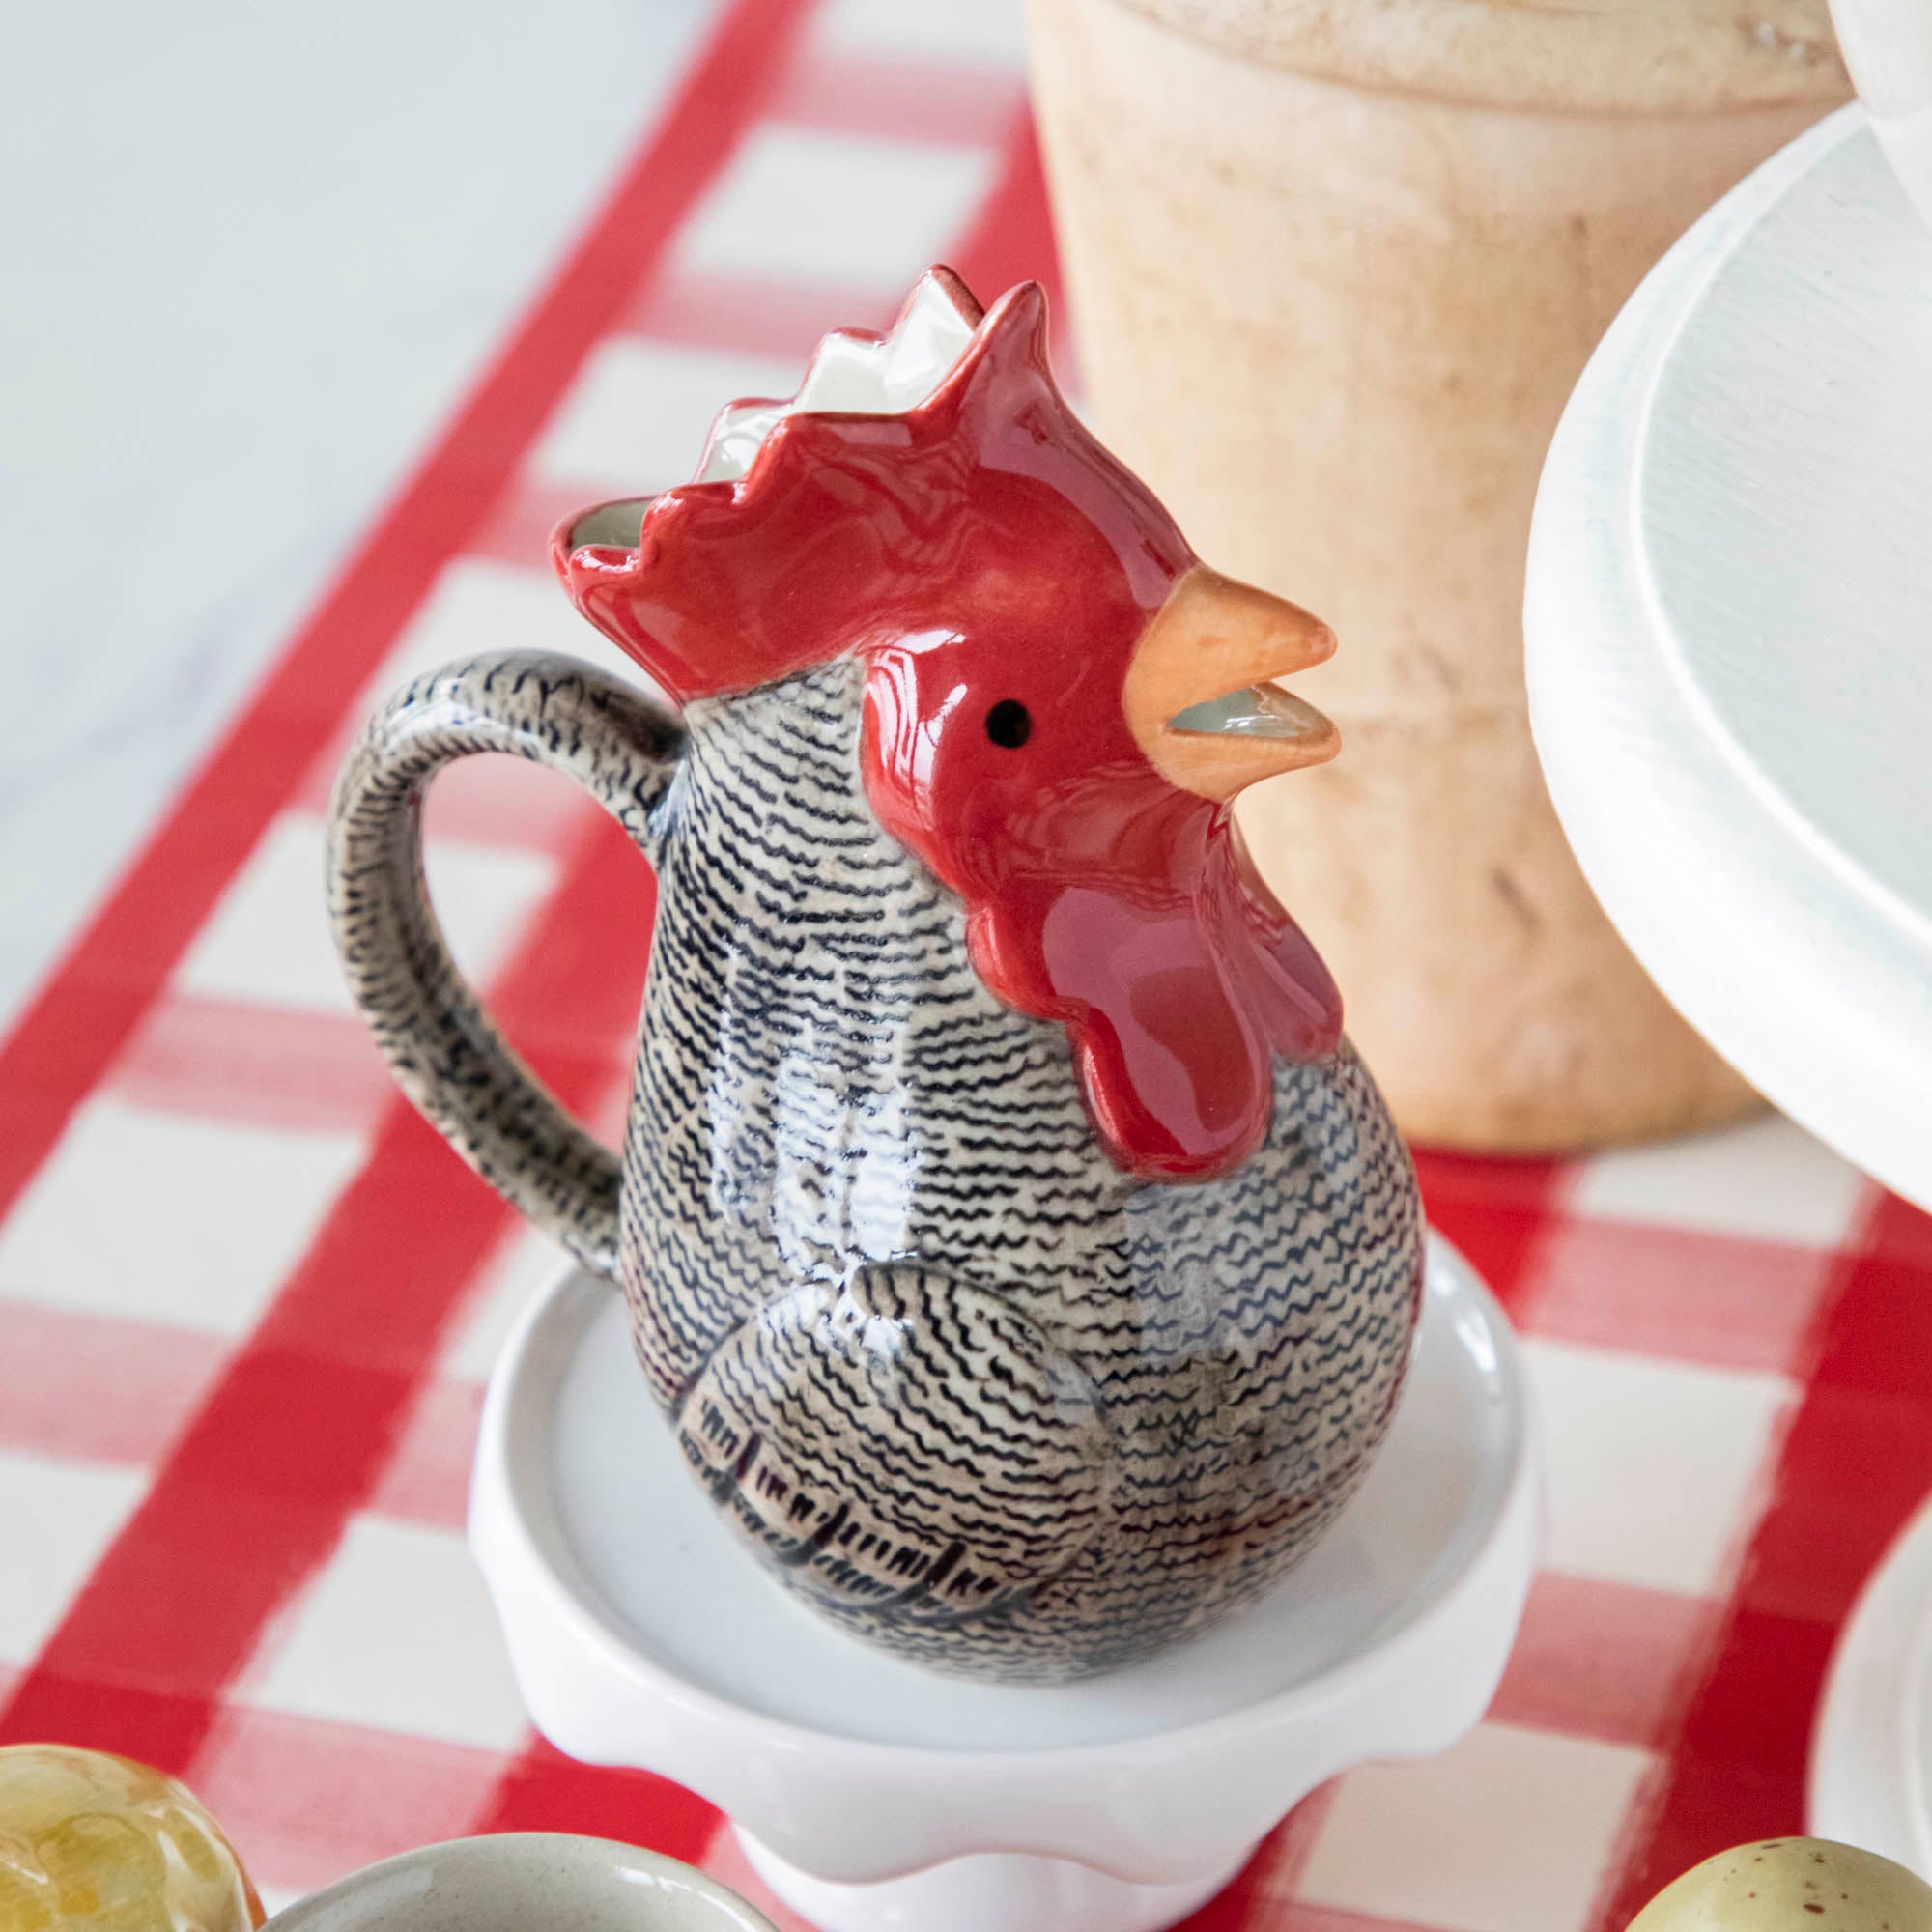 A Farm Animal Ceramics ceramic rooster sits on a red and white checkered table.